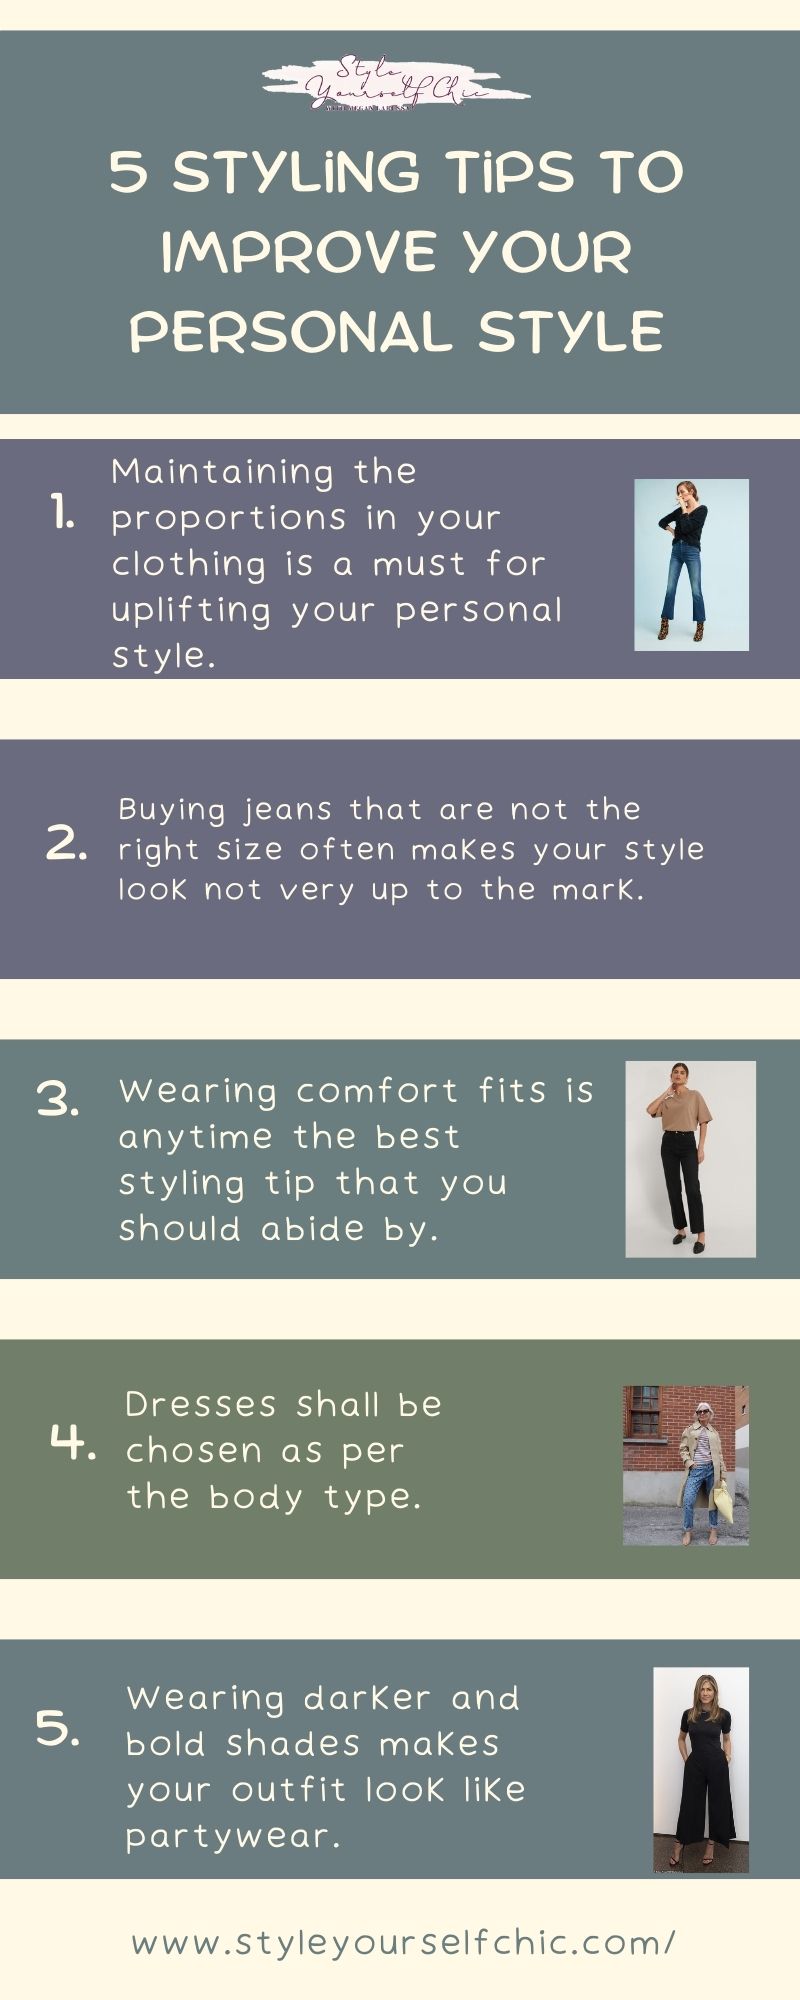 5 Styling Tips To Improve Your Personal Style